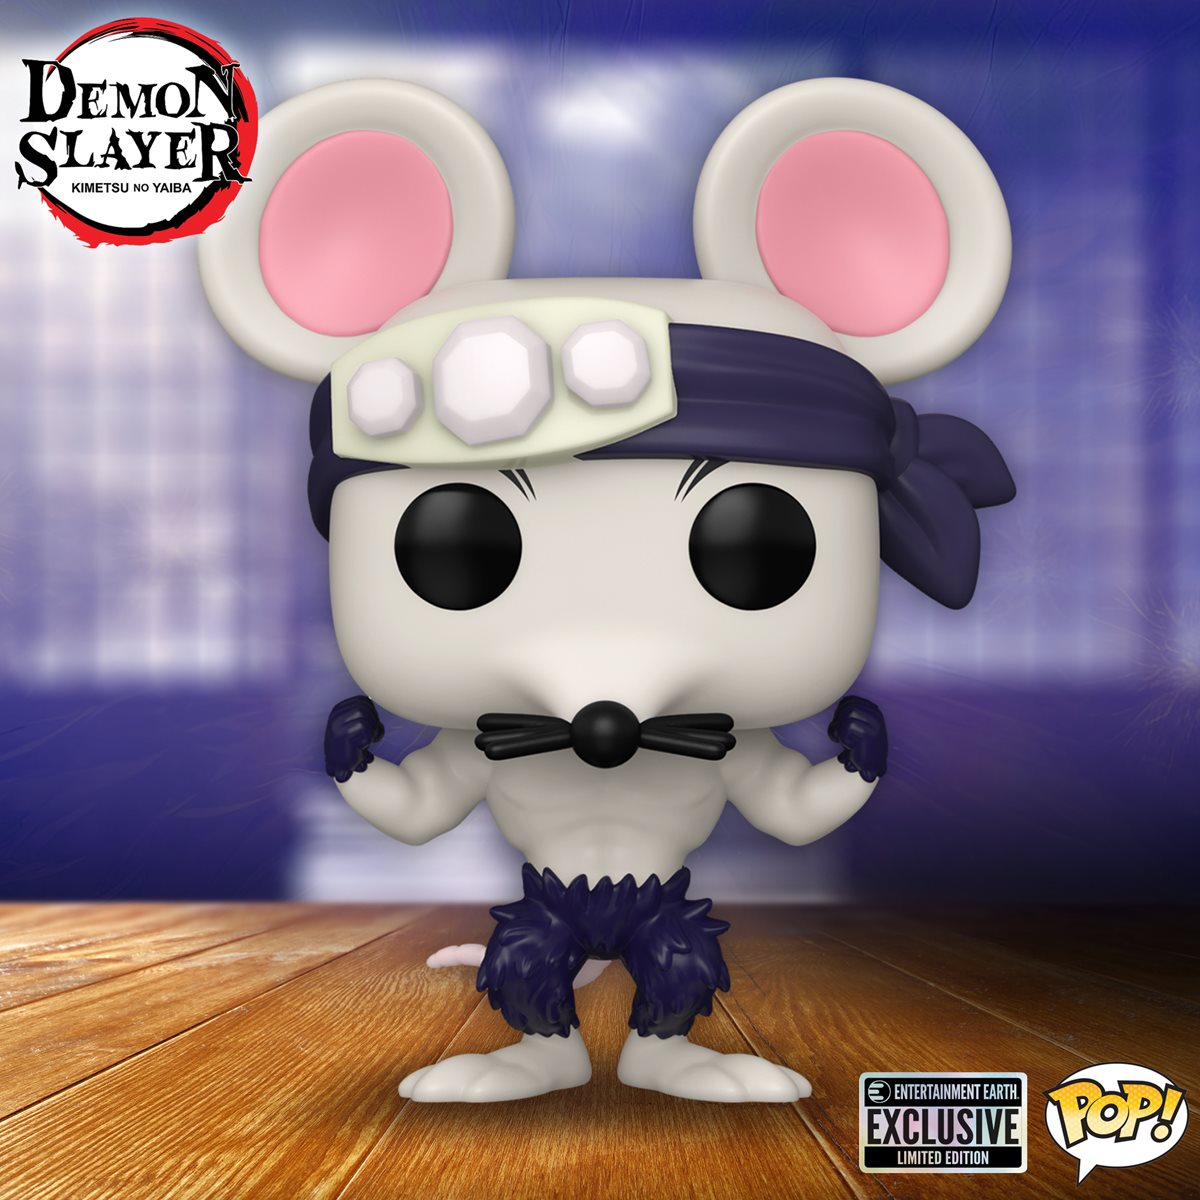 dS - Entertainment Earth Exclusive Funko